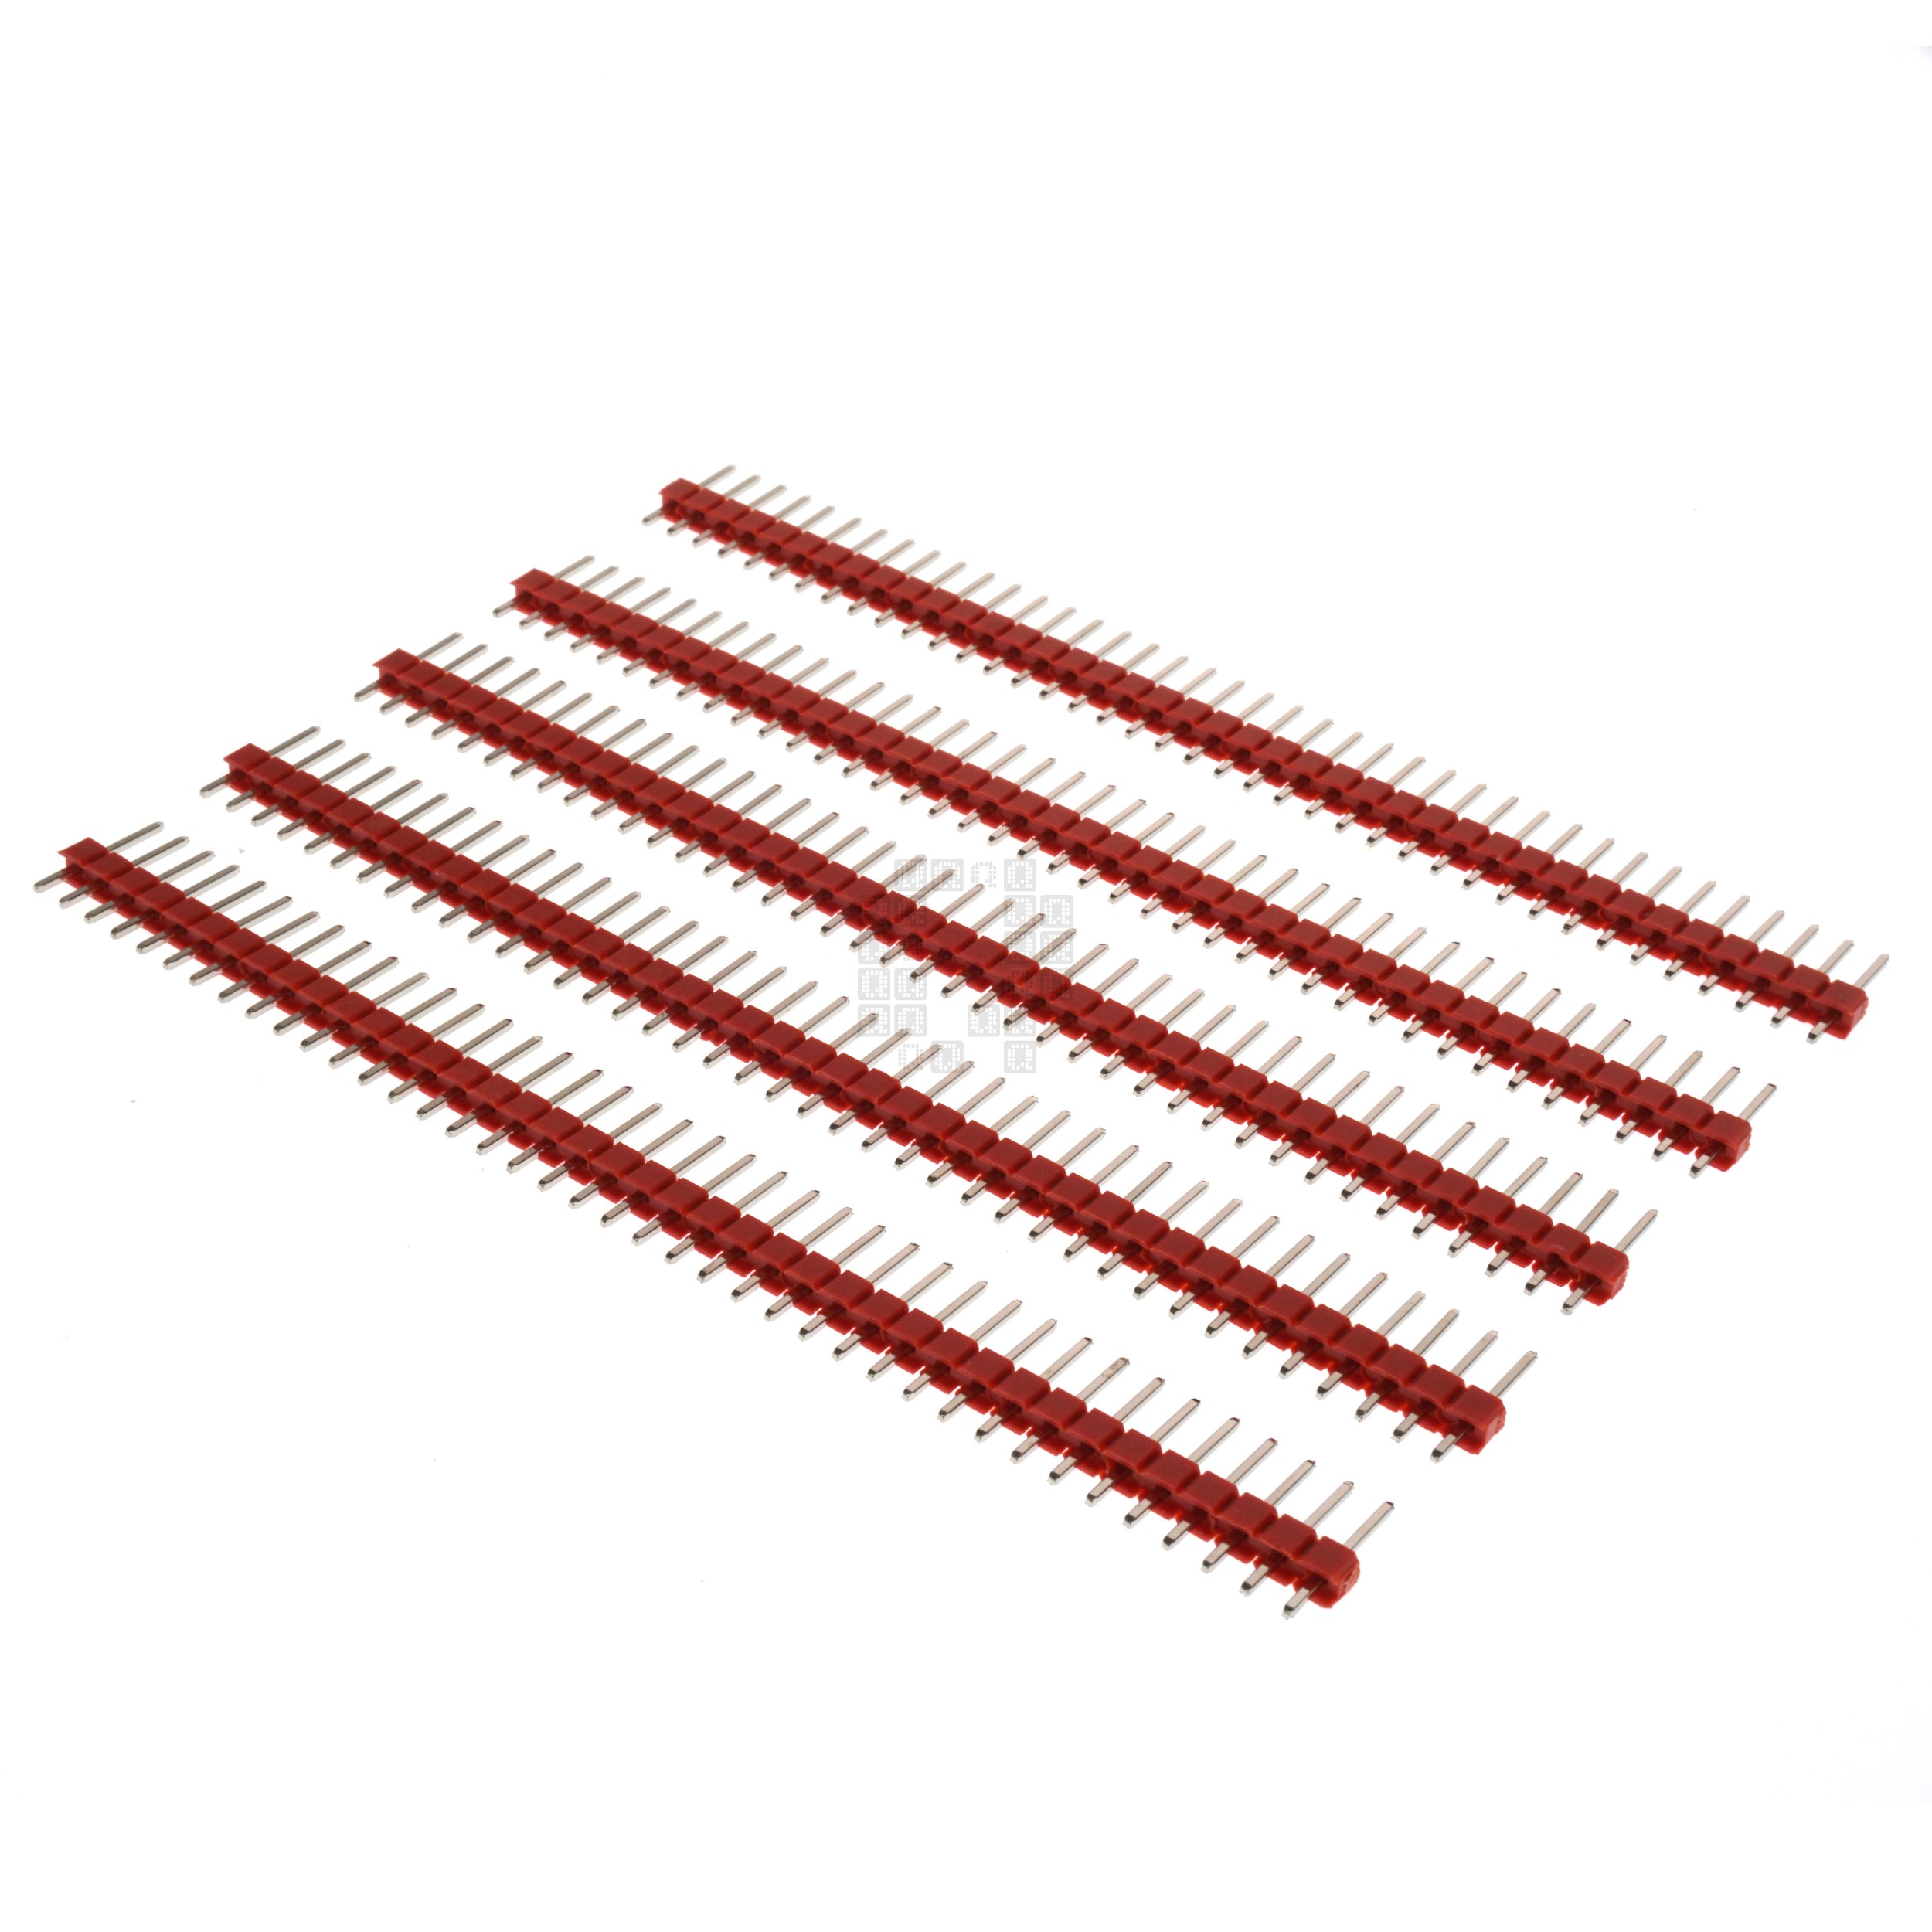 1x40 Pin Male Breakable Single Row Pin Header, 2.54mm Pitch, 11.2mm Height, 5-Pack, Red